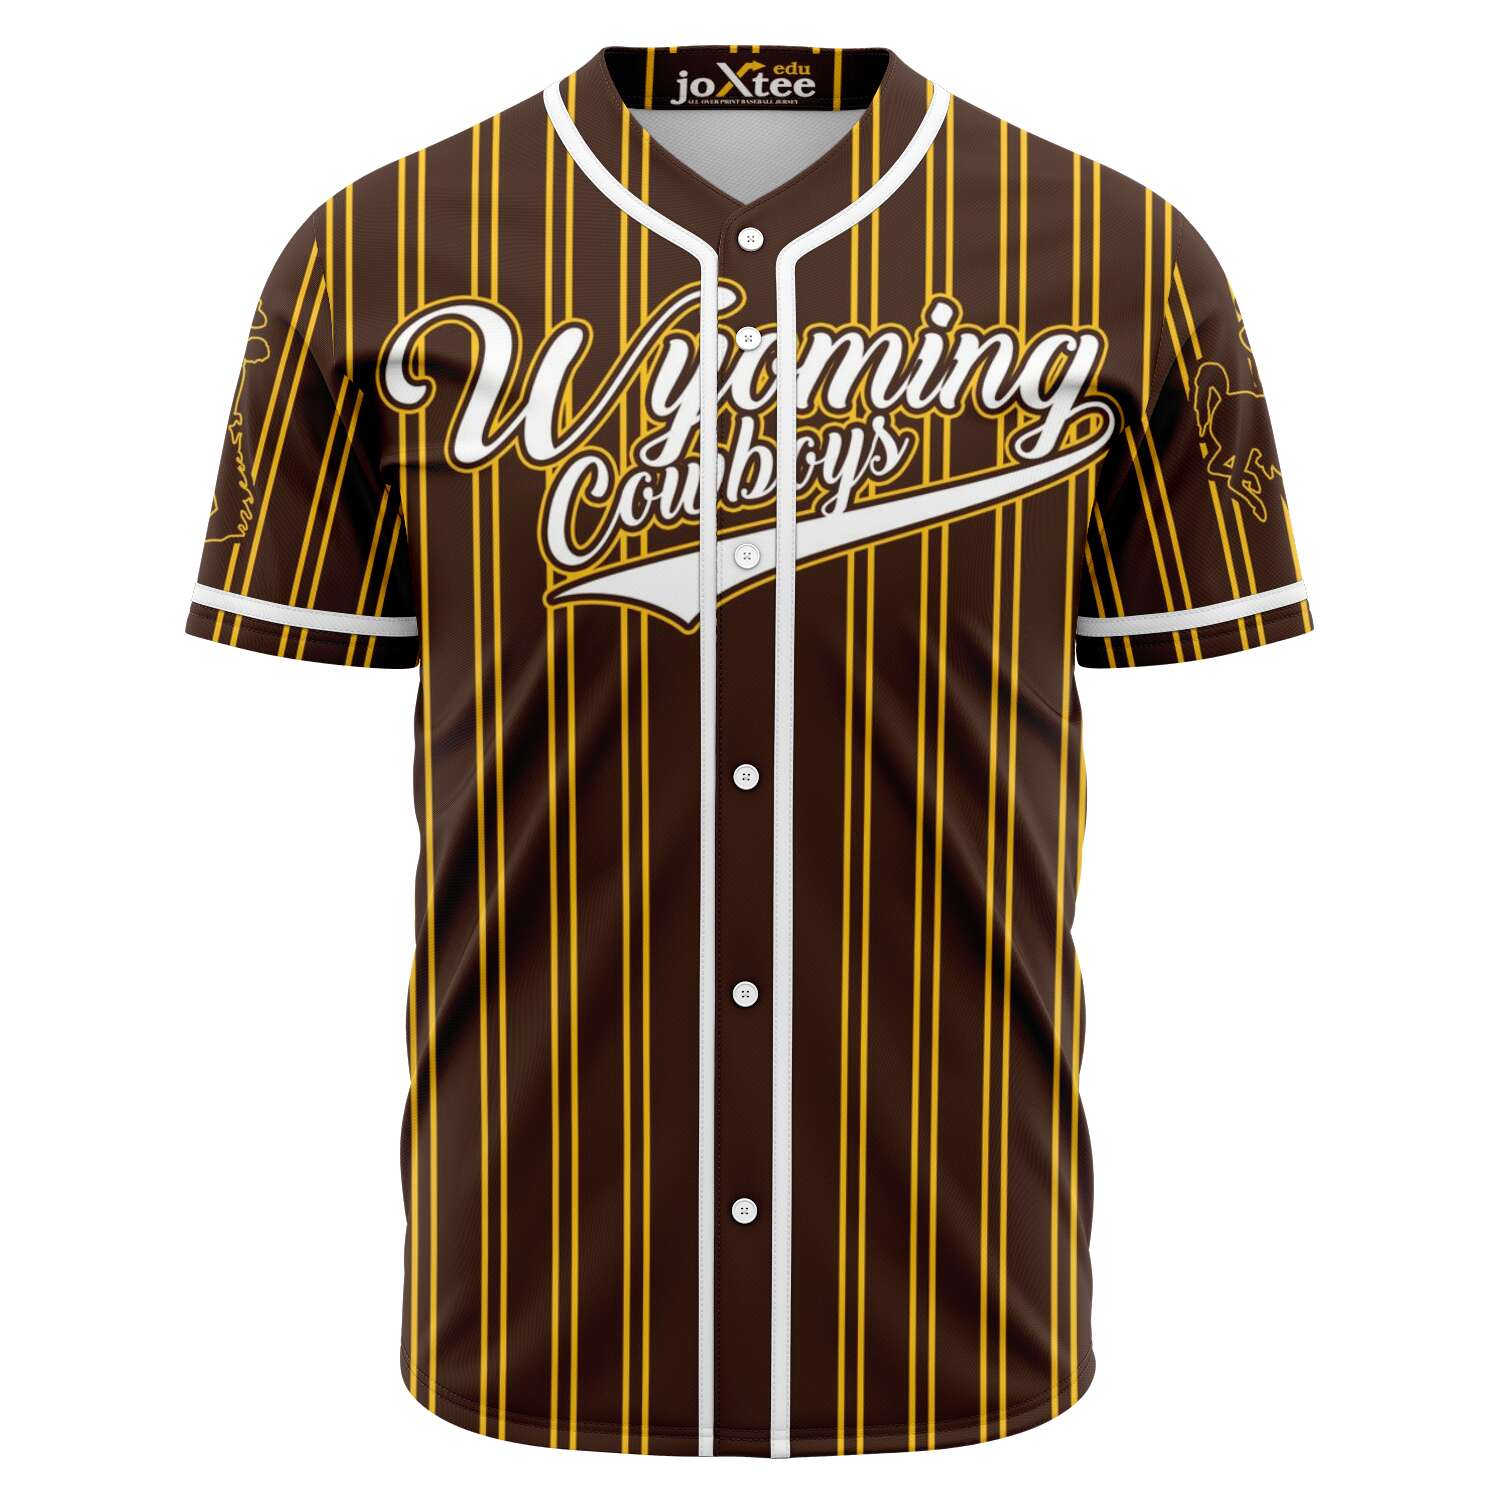 Personalized Baseball Jersey  All-Over-Print, Moisture Wicking